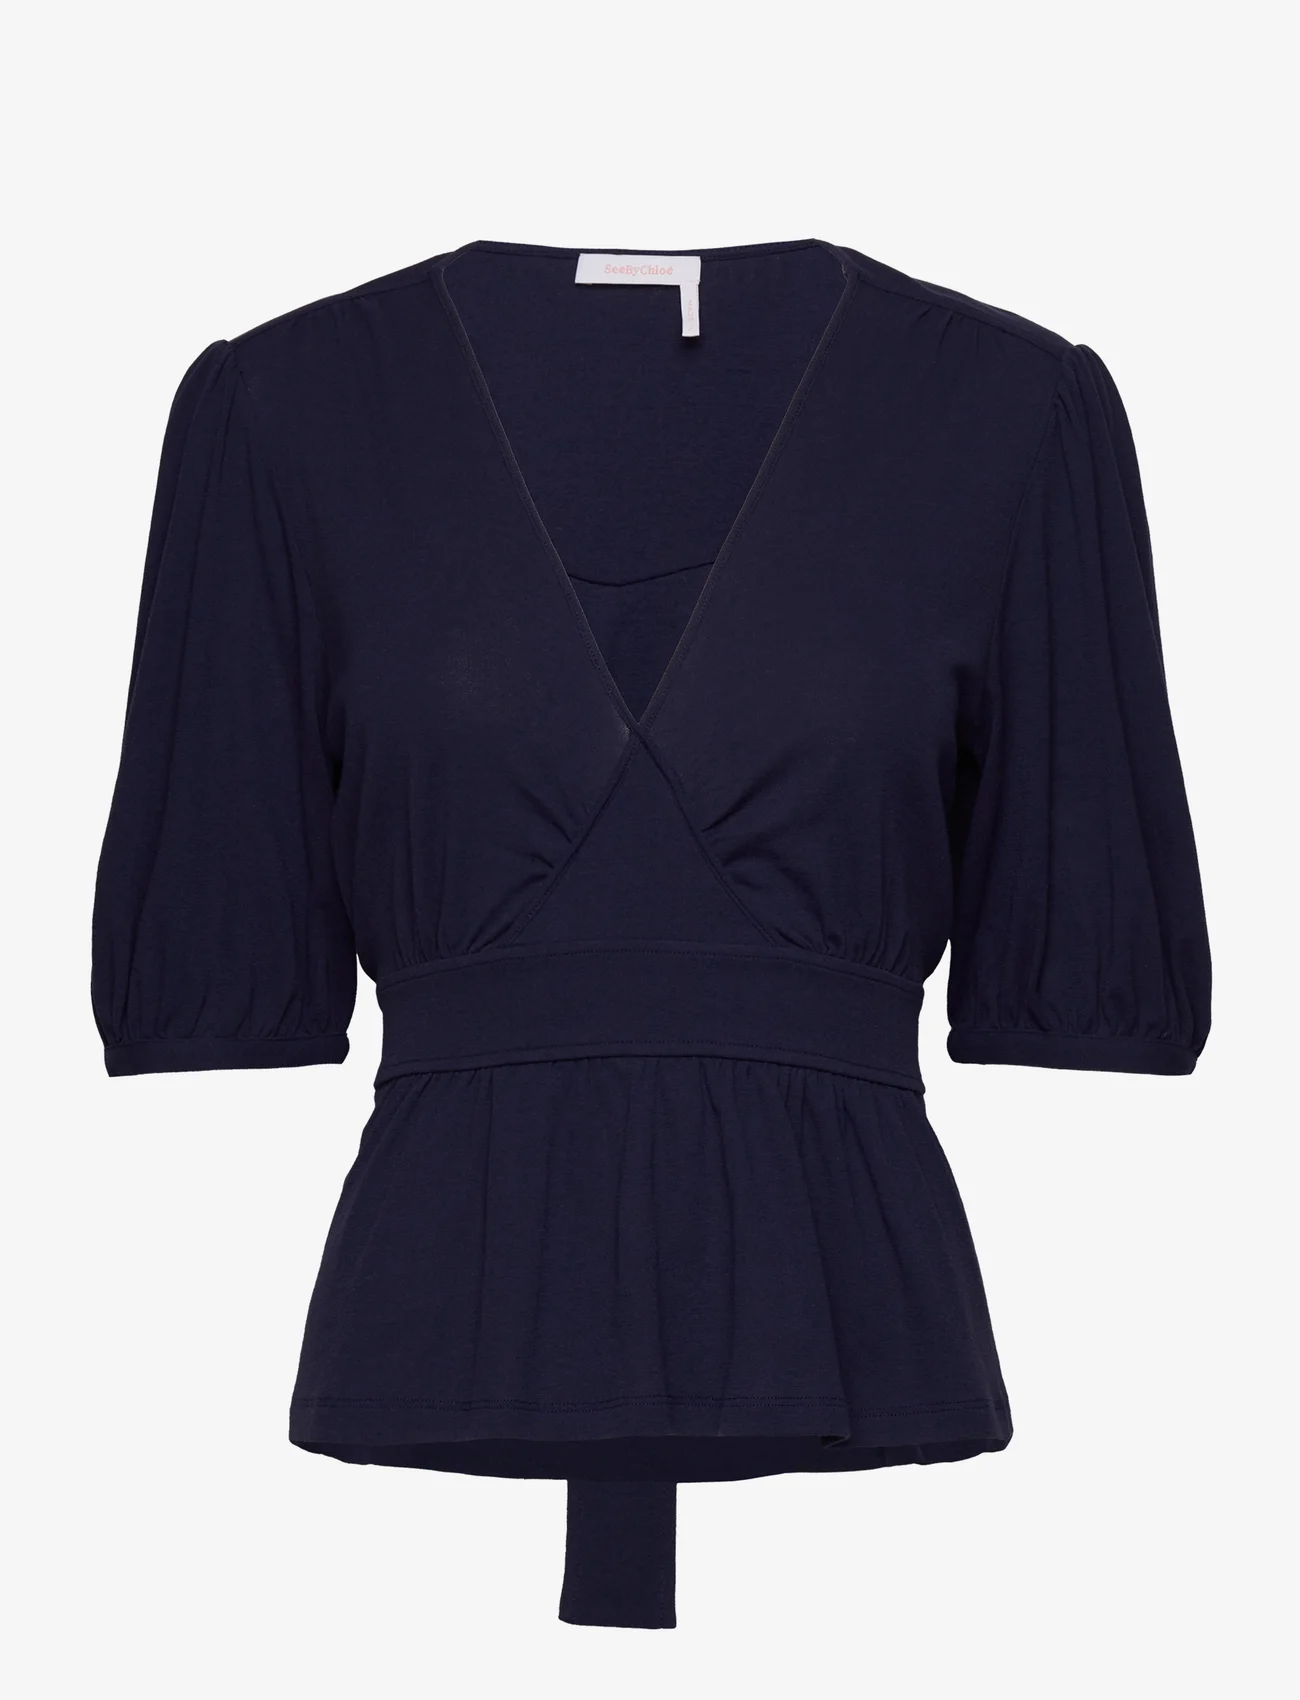 See by Chloé - Top - blouses korte mouwen - evening blue - 0